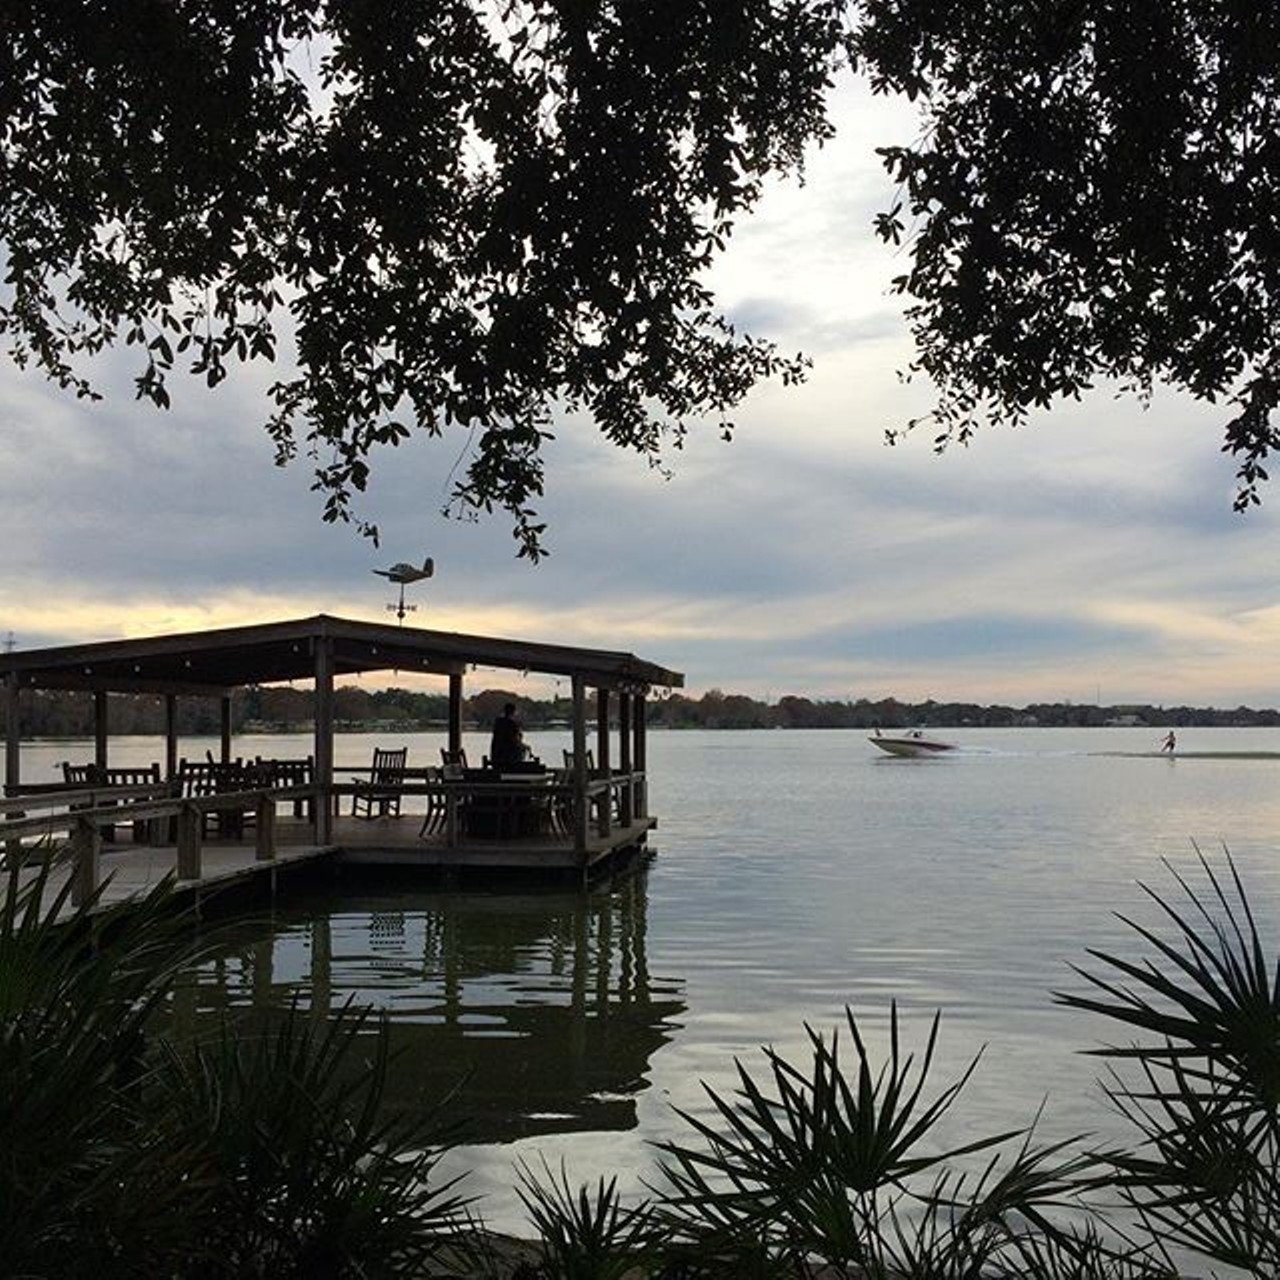 7. Hillstone's waterfront patio 
If you're looking for more of a romantic vibe, Hillstone's lakeside view can't be beat. Down a few cocktails, and hangout by their fire pit. 
Photo via elizabethseyes/Instagram